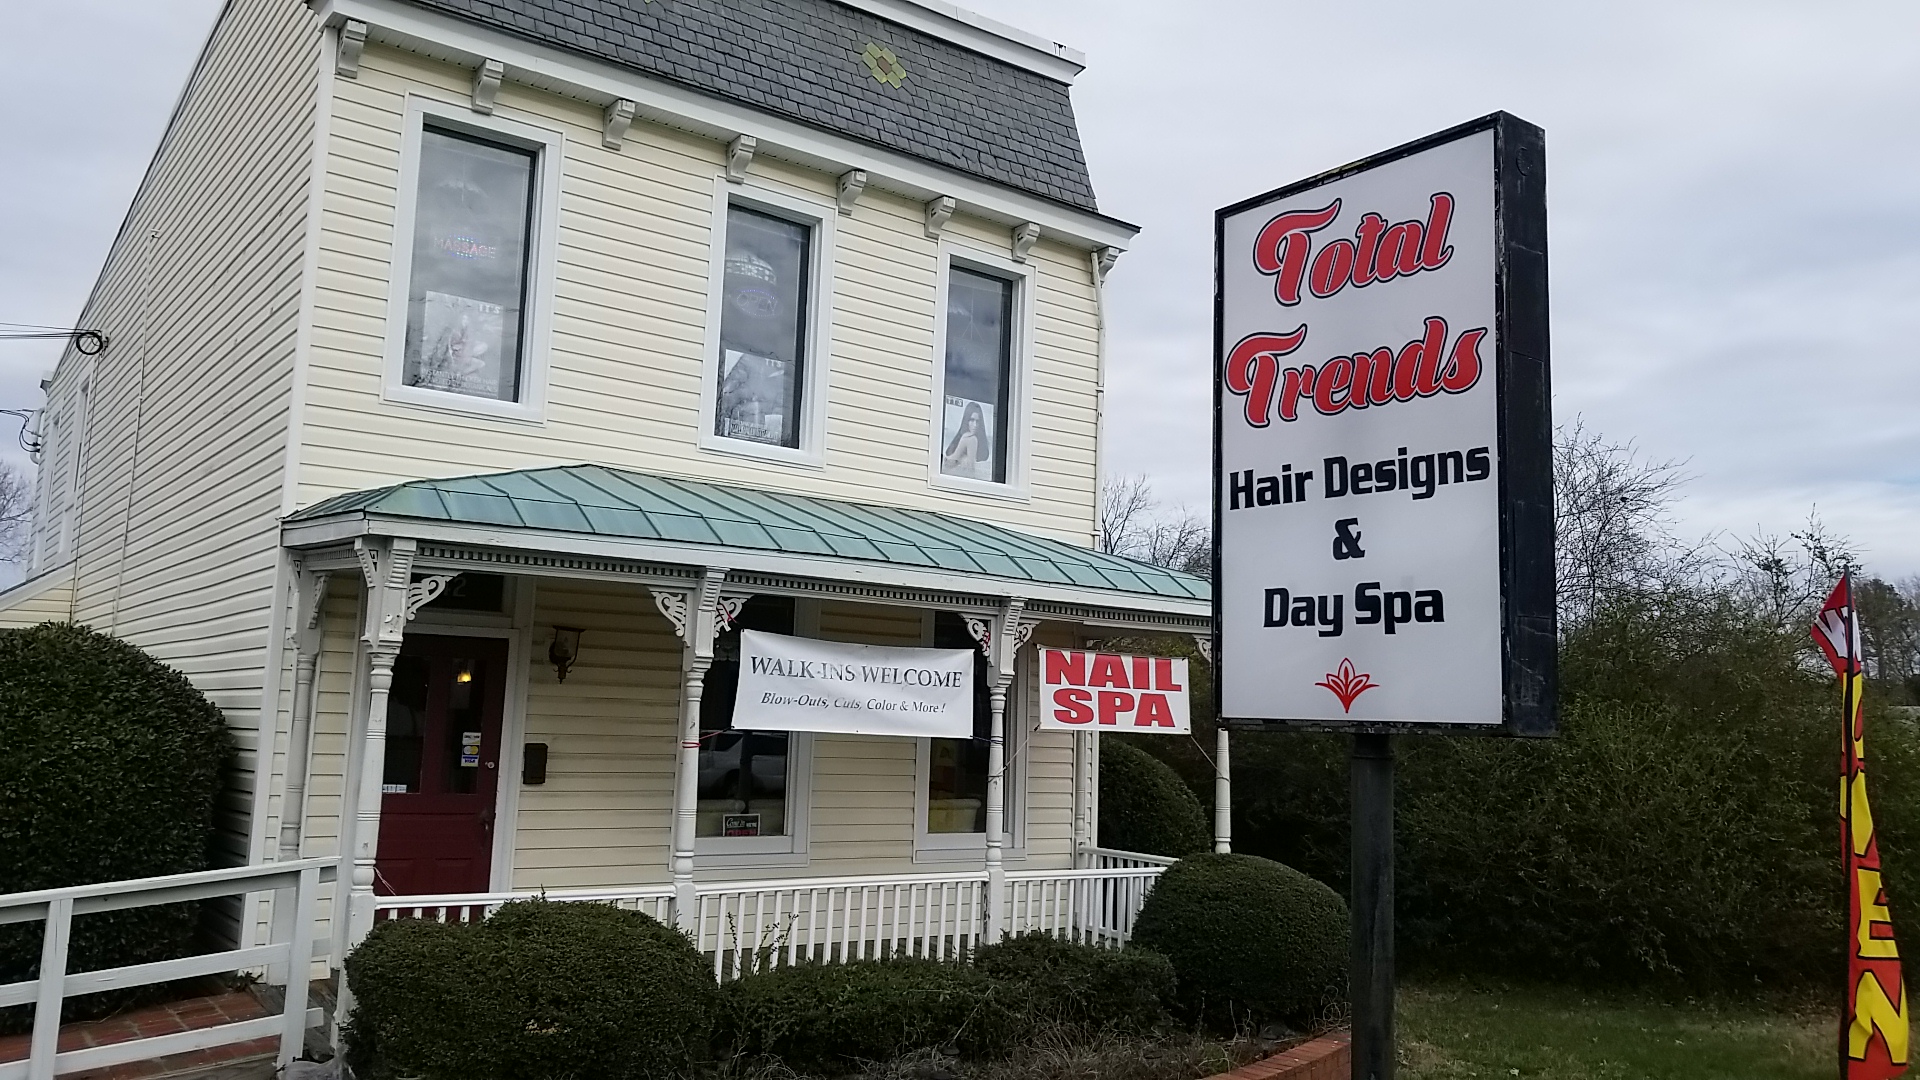 Total Trends Hair Design & Day Spa